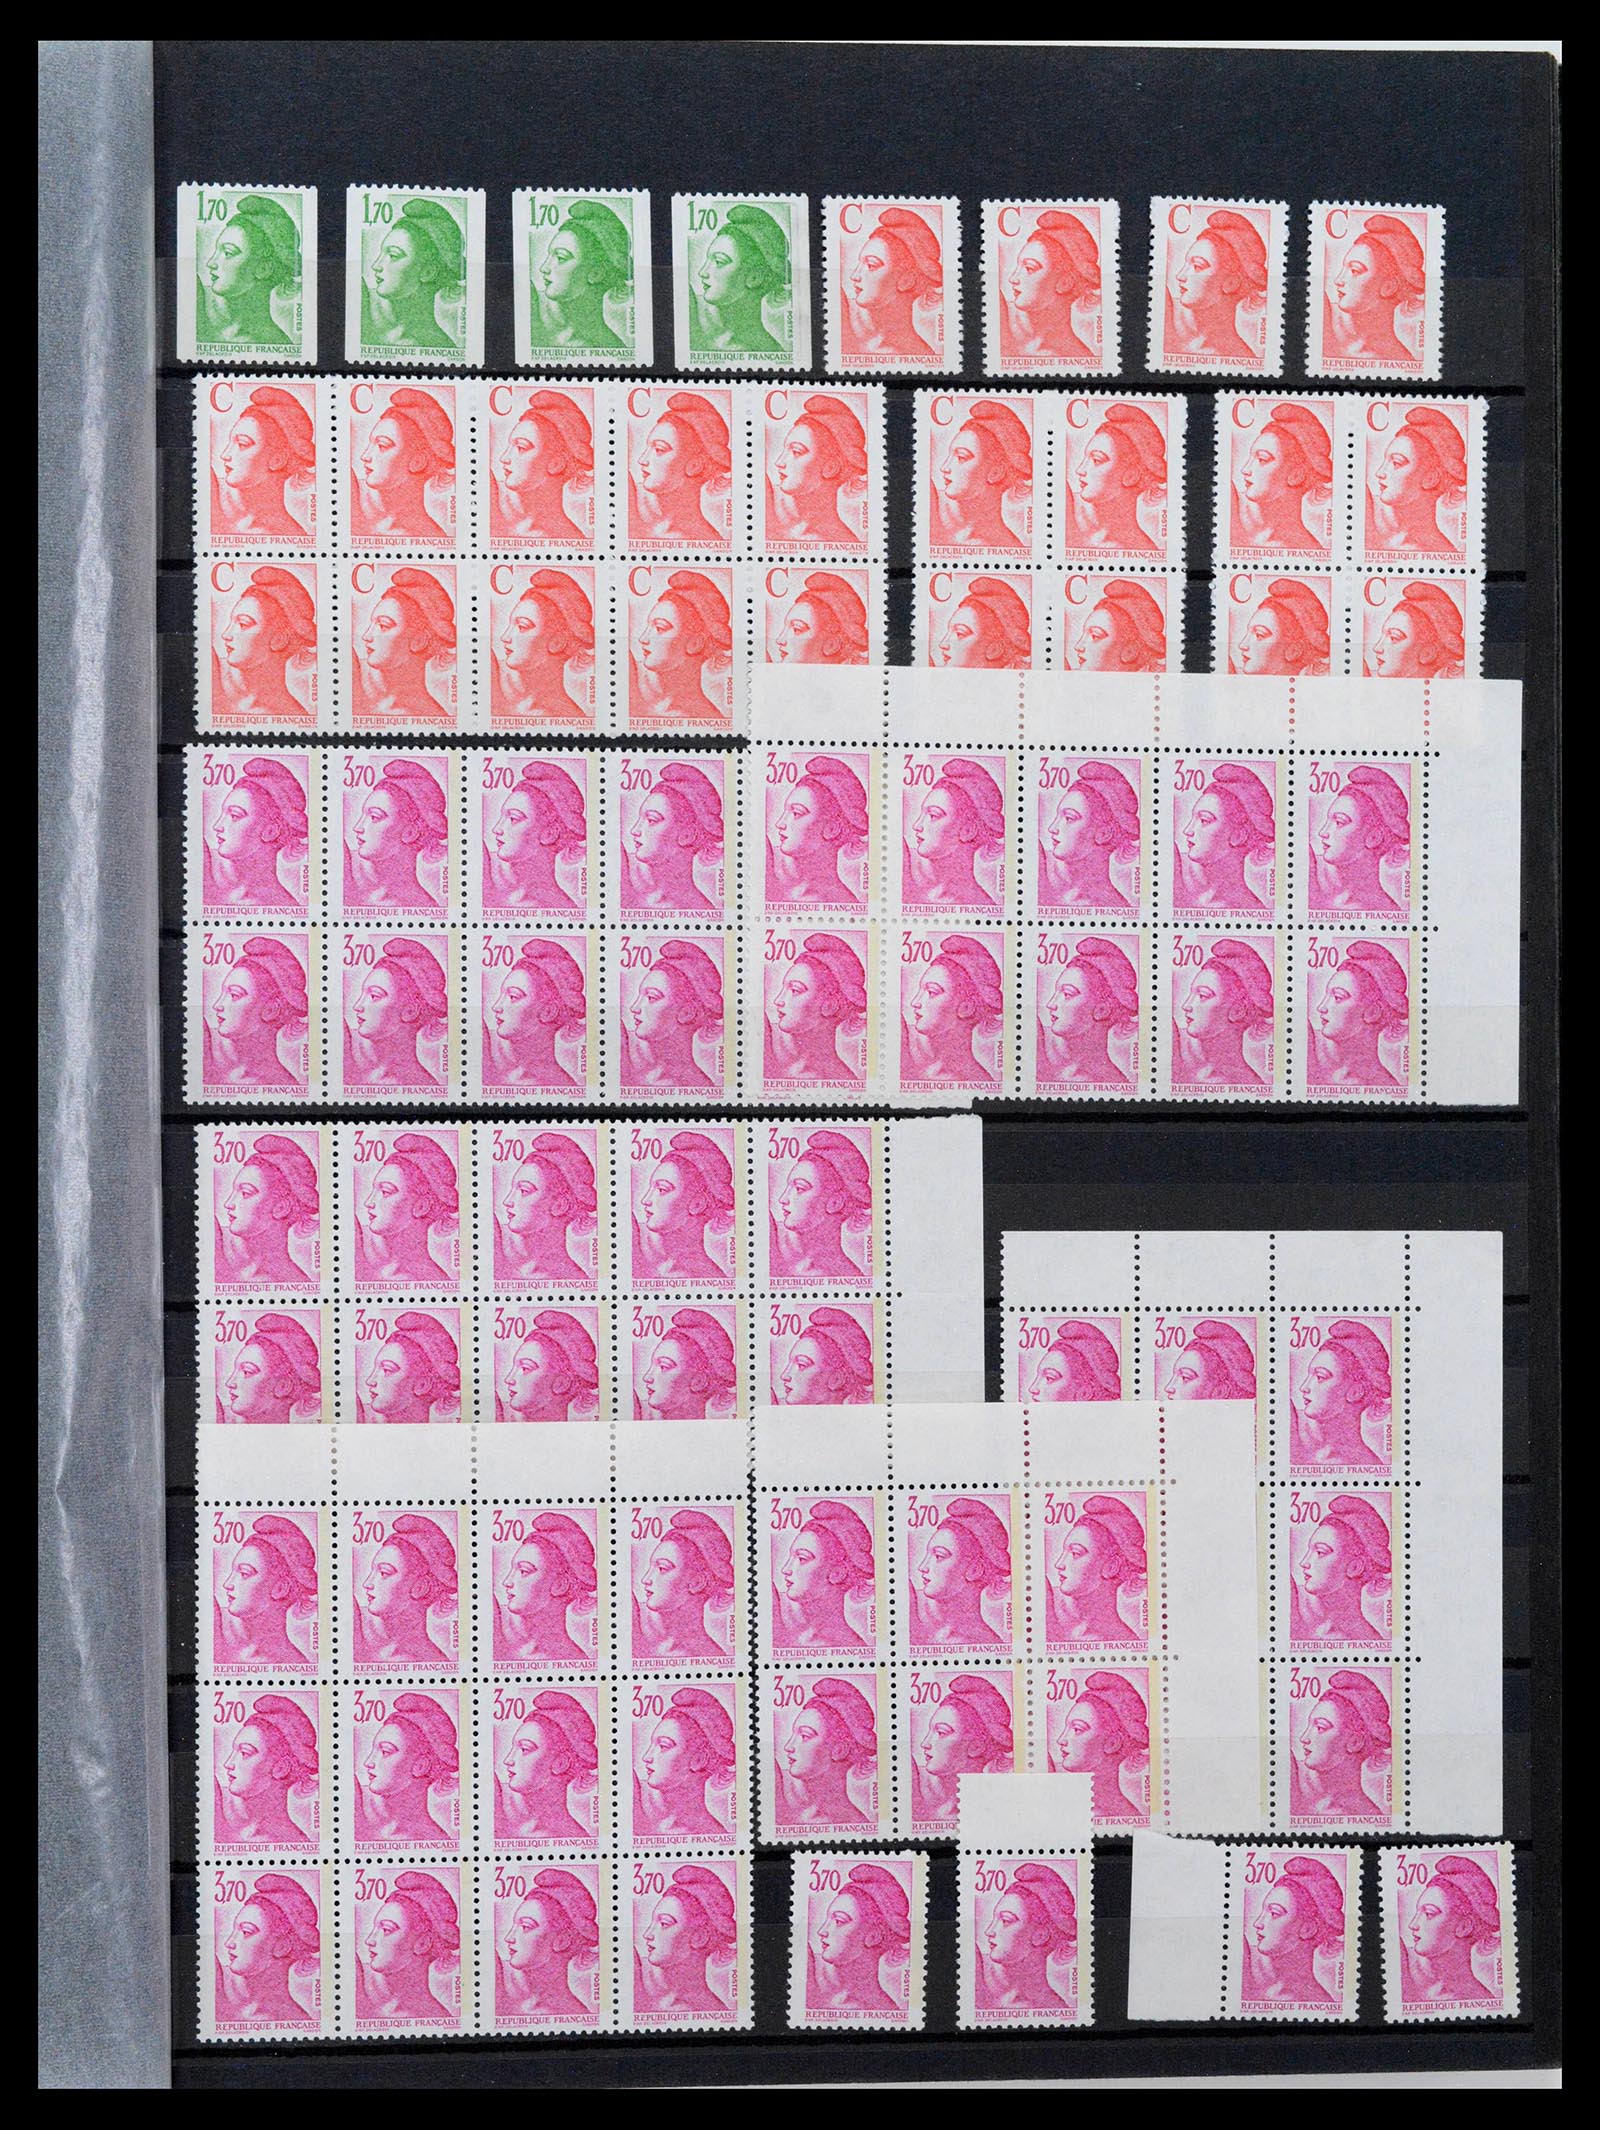 39423 0039 - Stamp collection 39423 France varieties 1862-1985.